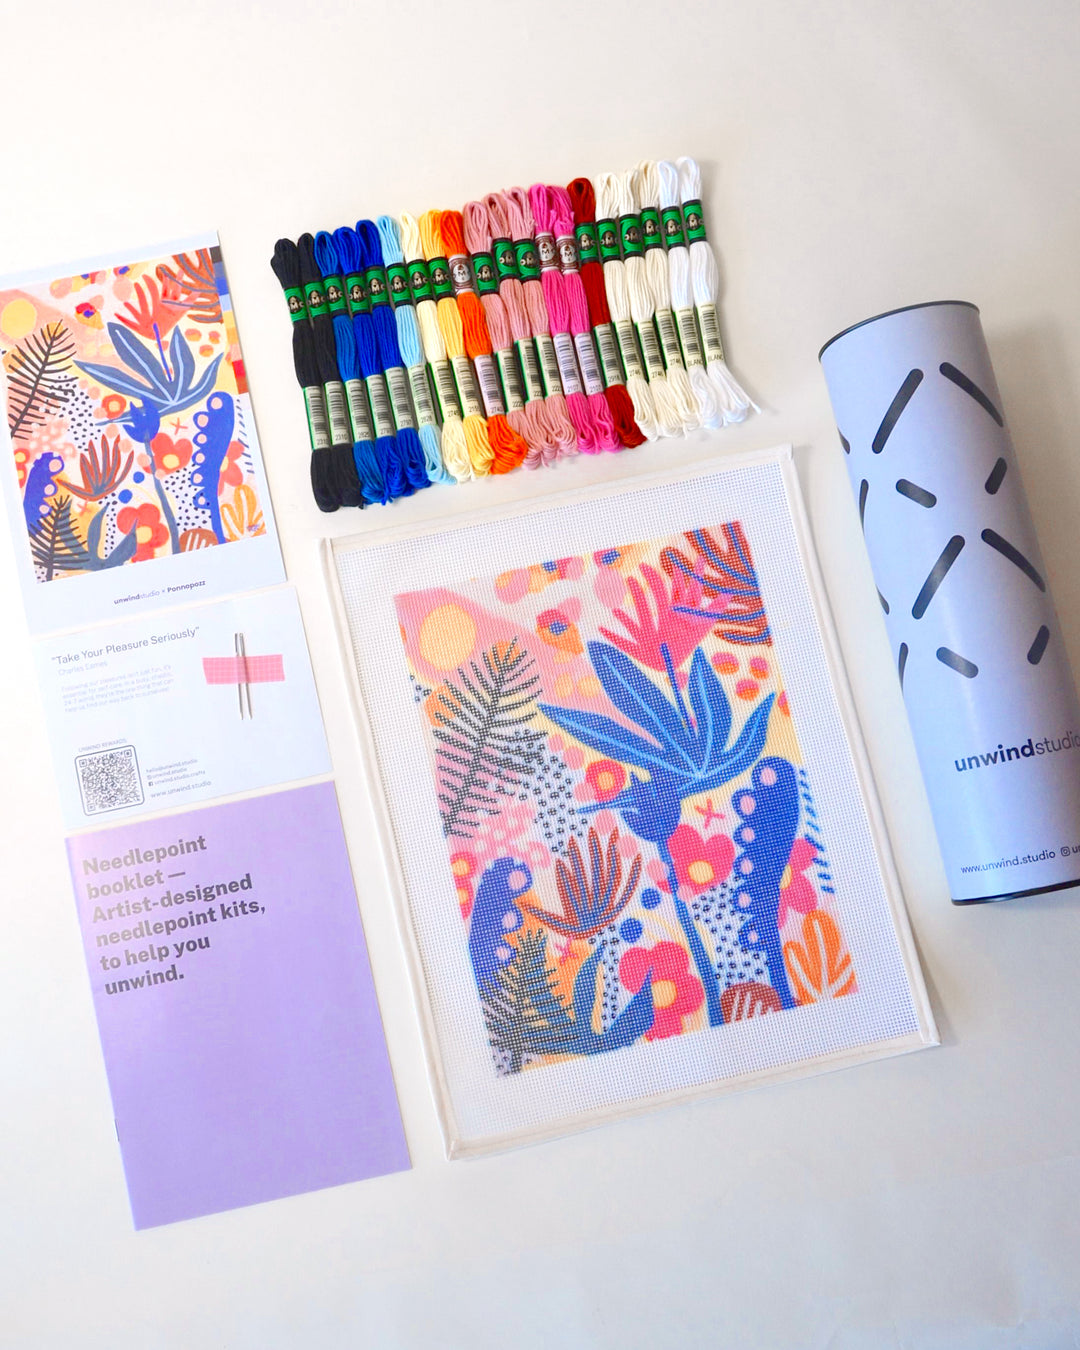 Camille abstract and modern design for a needlepoint kit by Unwind Studio in collaboration with artist Ponnopozz